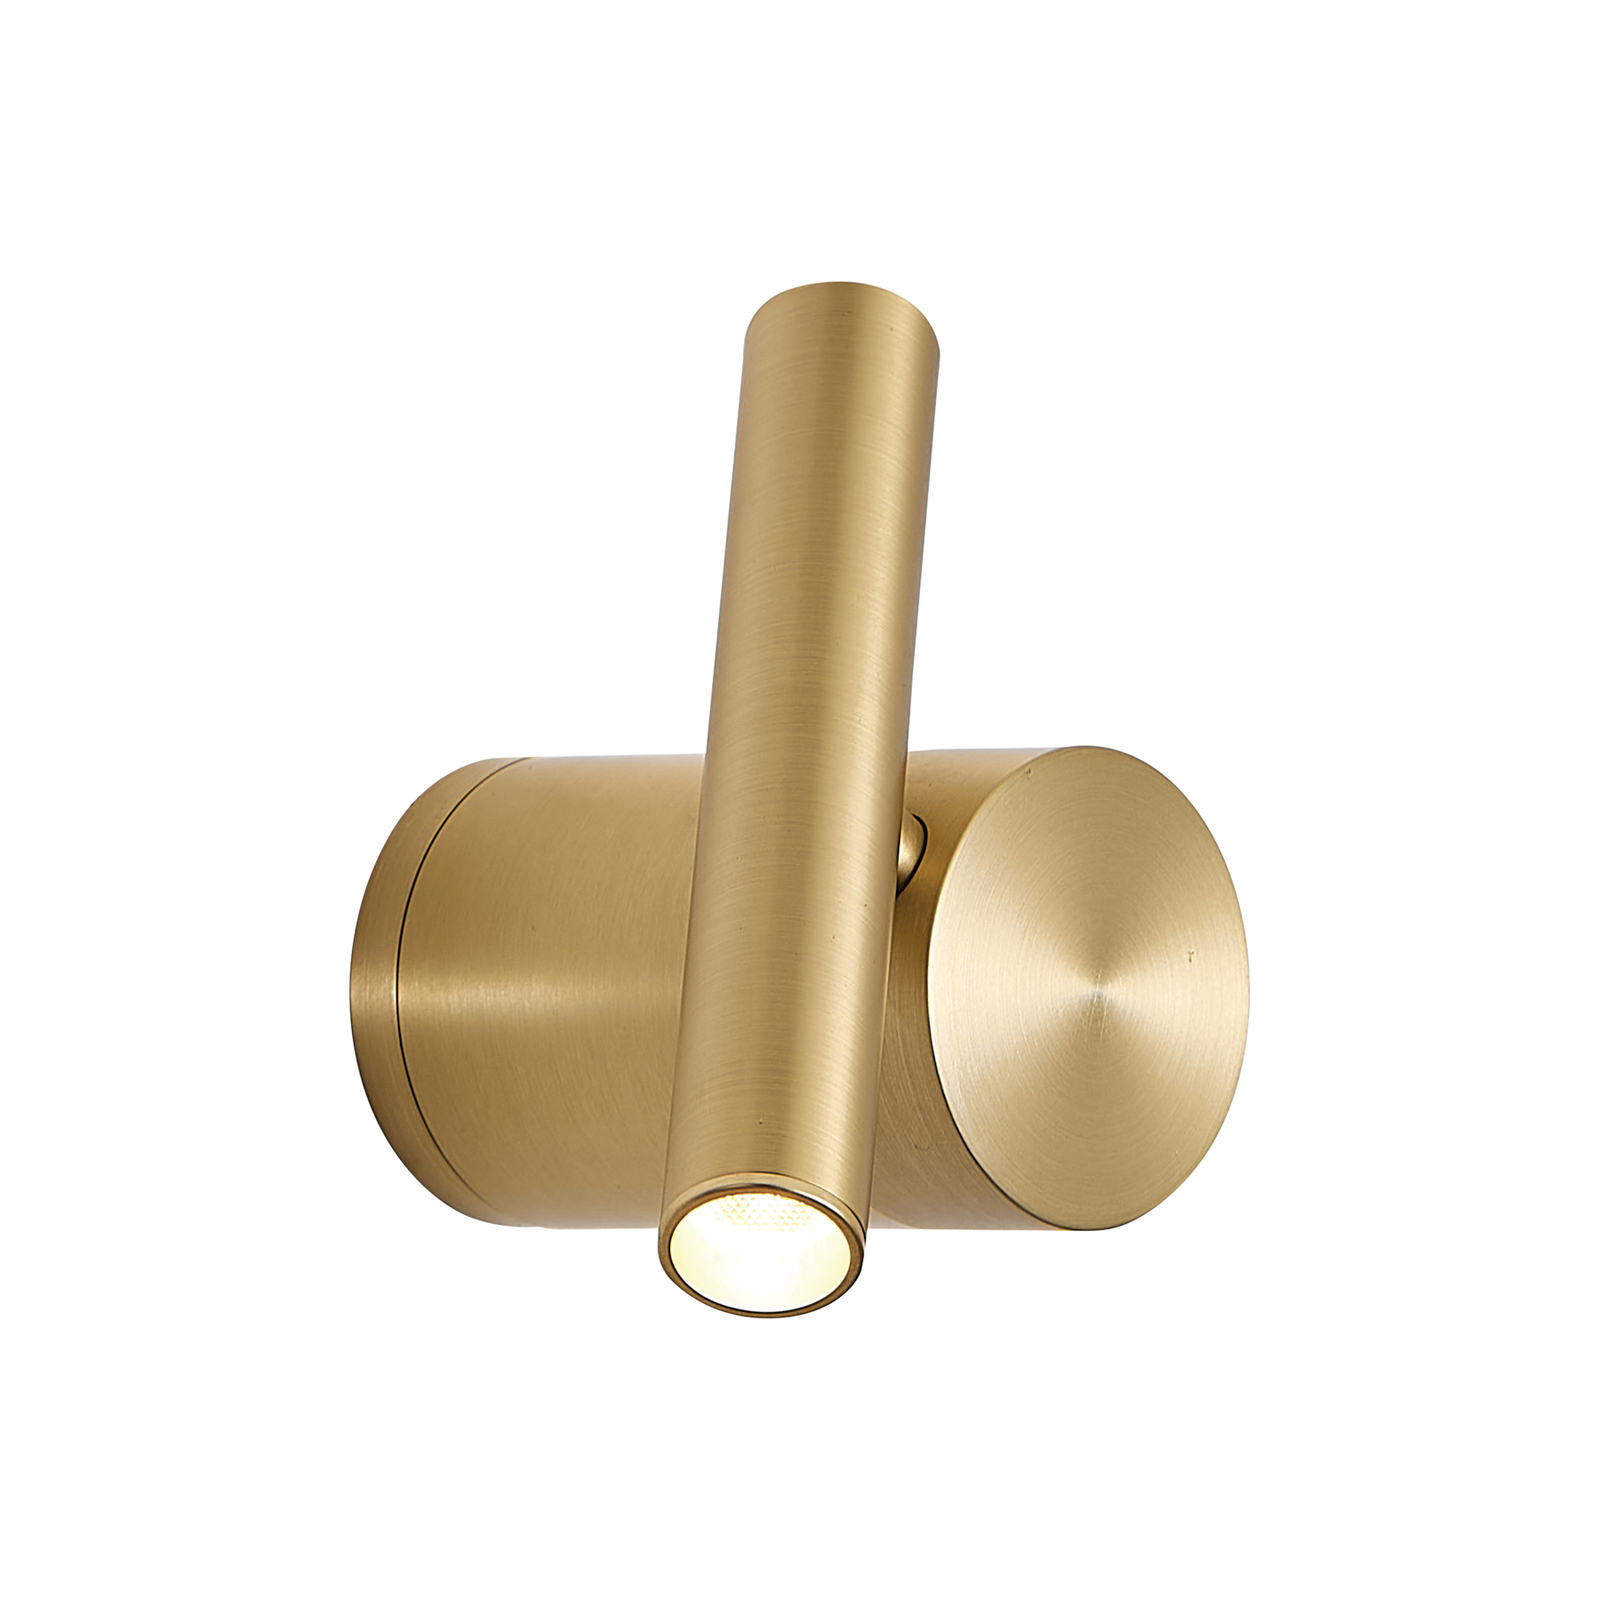 Planet LED wall light, gold